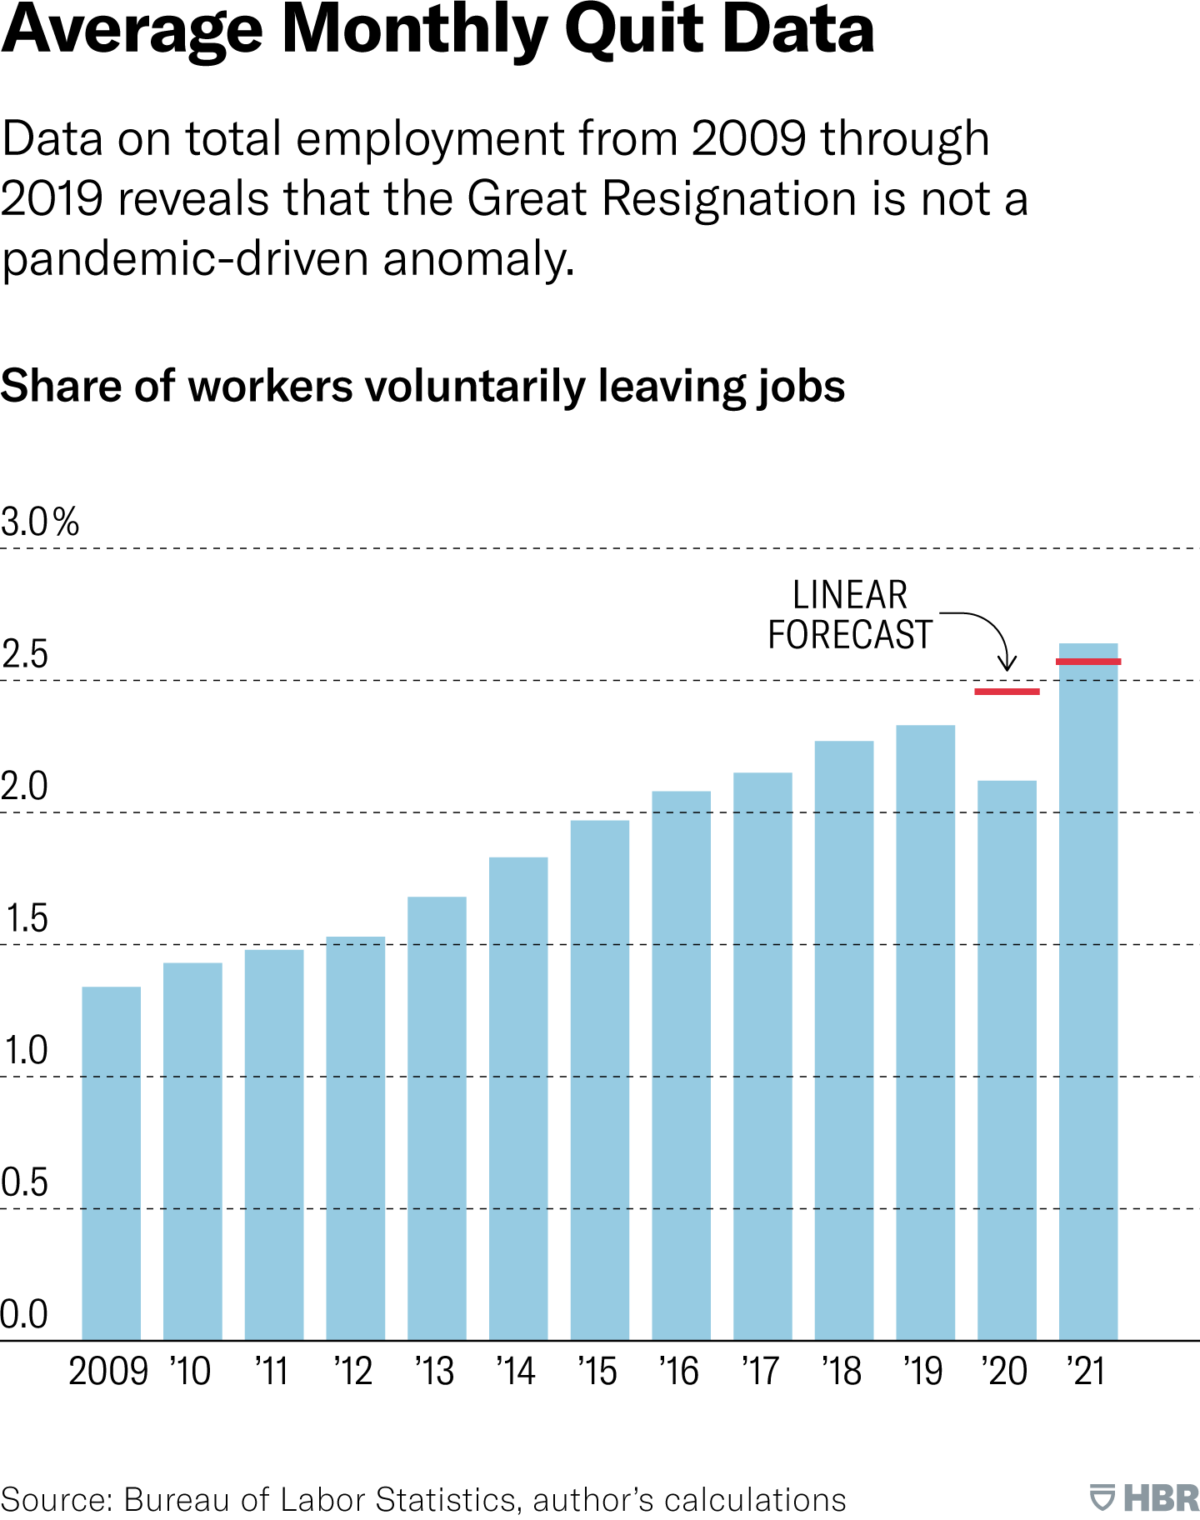 This chart from Harvard Business Review shows how the Great Resignation is not a pandemic-drive anomaly.